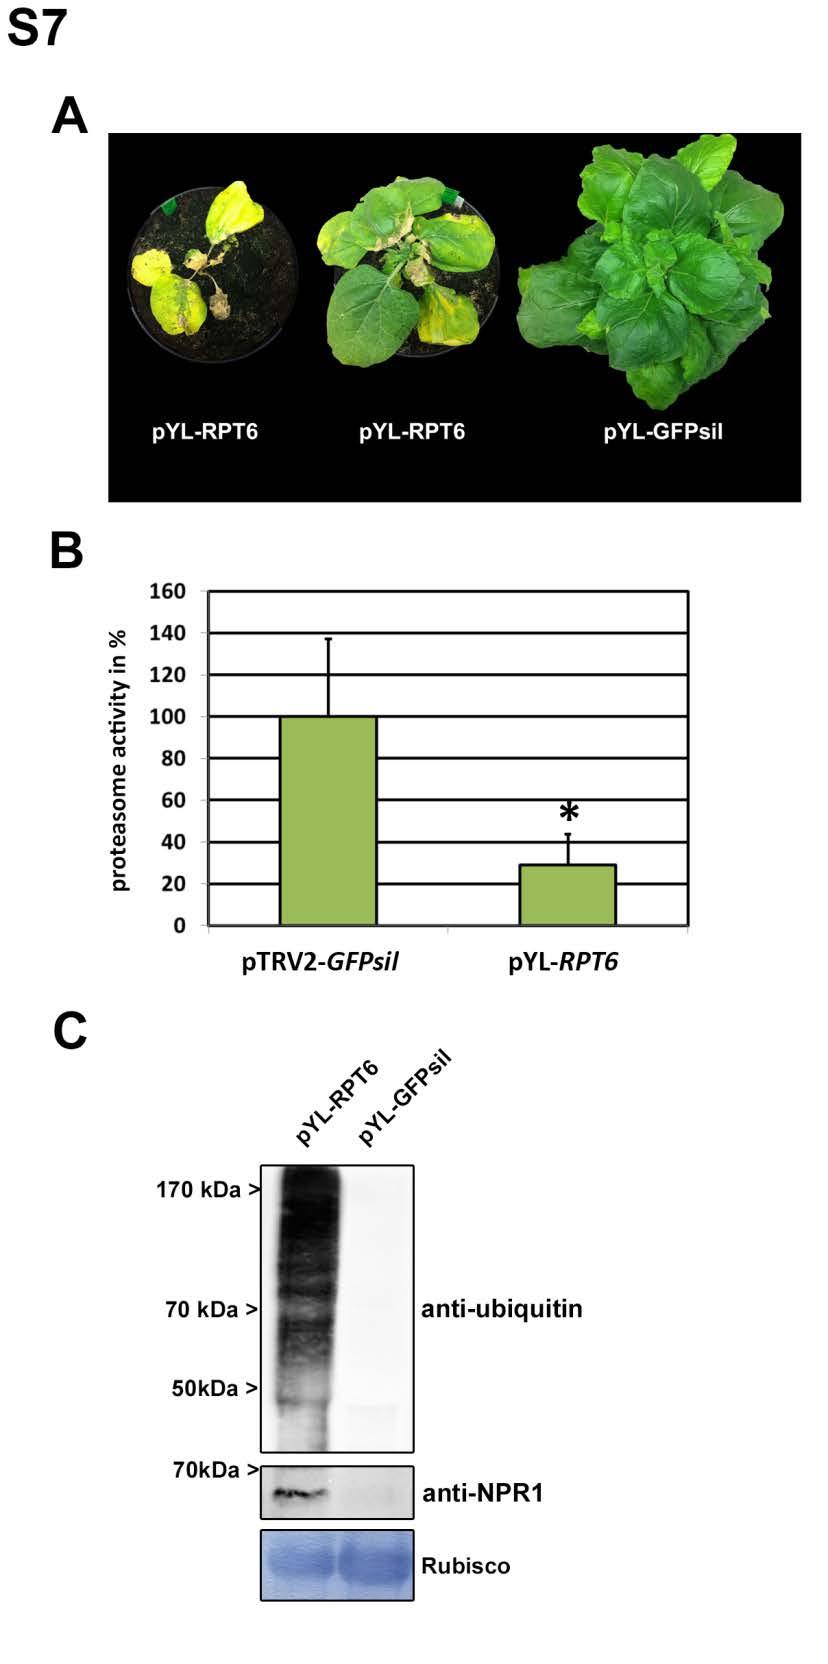 Figure S7: Virus-induced gene silencing of RPT6 in N. benthamiana mimics XopJtriggered effects. (A) Phenotype of RPT6 - VIGS plants in comparison to the ptrv2-gfpsil control. Picture was taken 14 dpi.